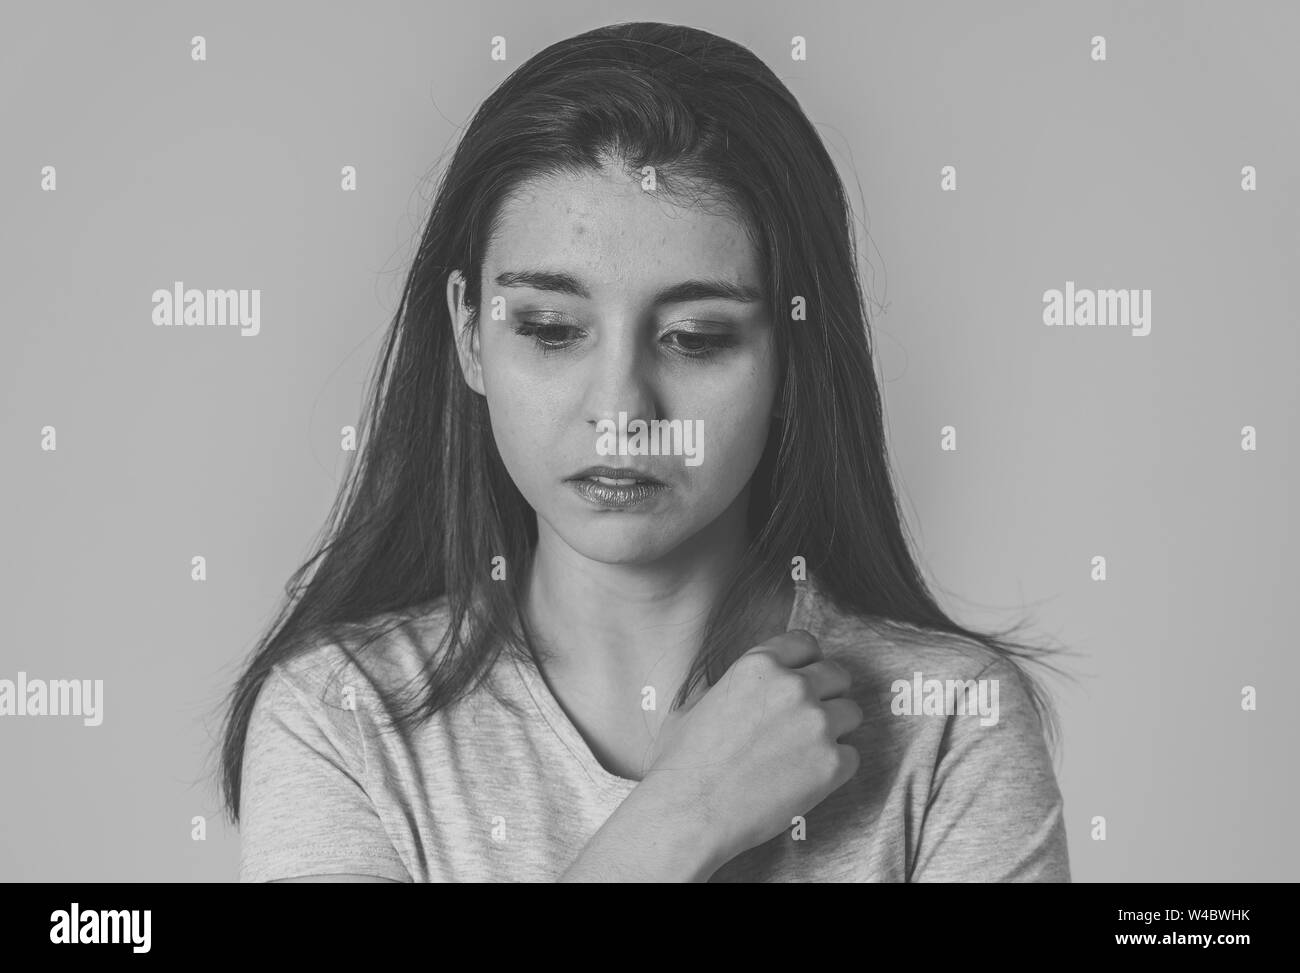 Black and white portrait of a young sad woman, serious and concerned, looking worried and thoughtful. Feeling sorrow and depression. With copy space. Stock Photo